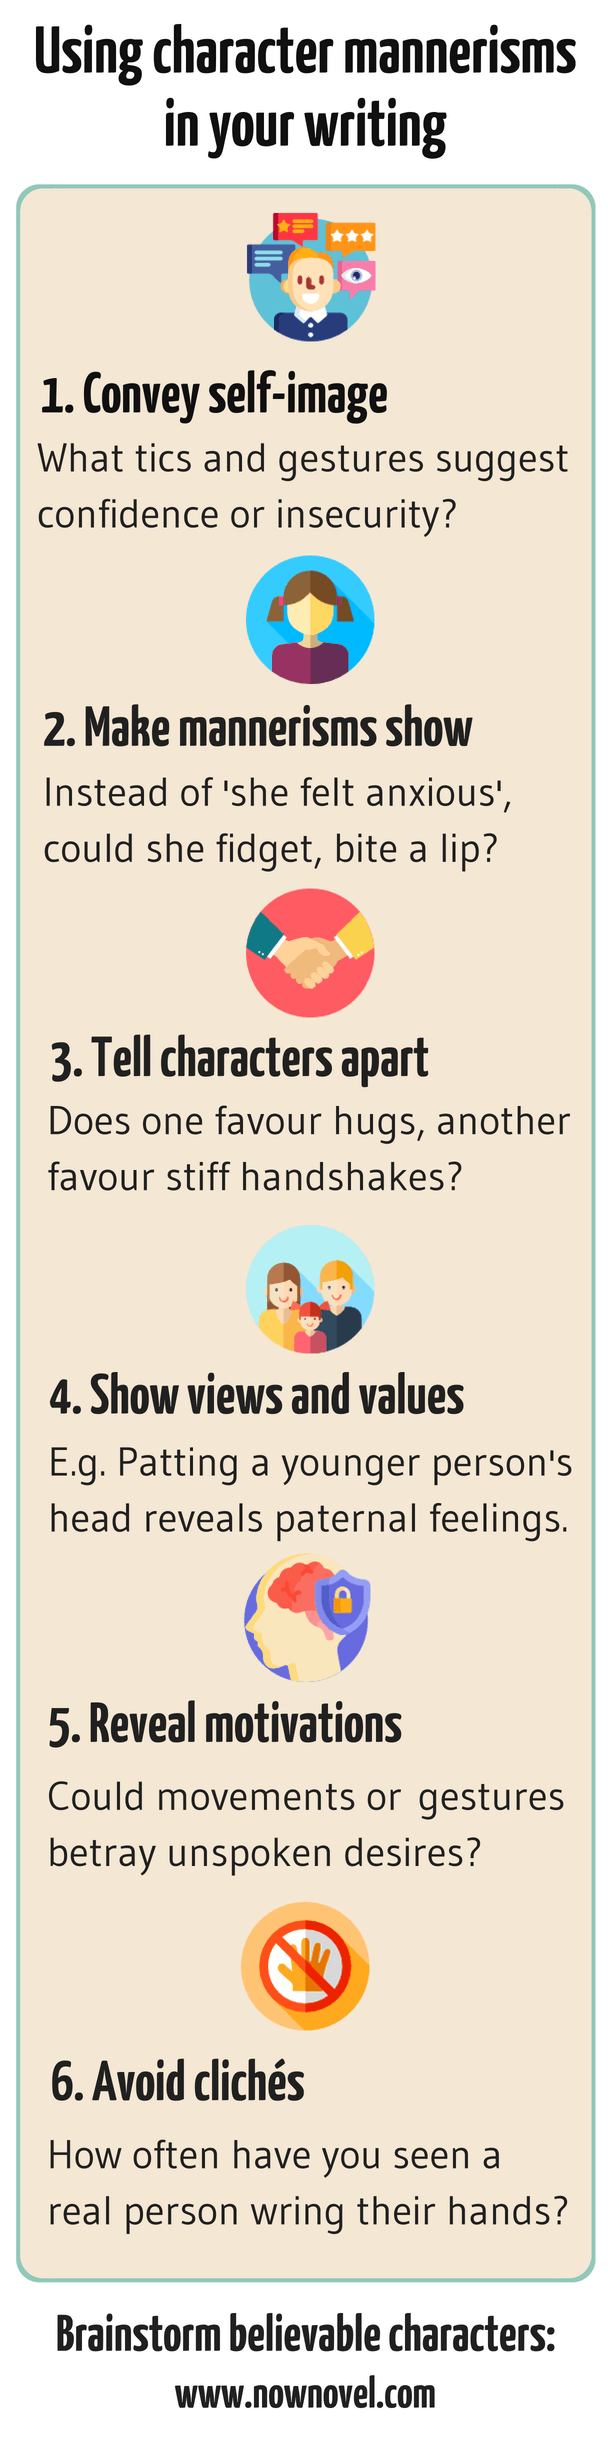 Character mannerisms - infographic | Now Novel